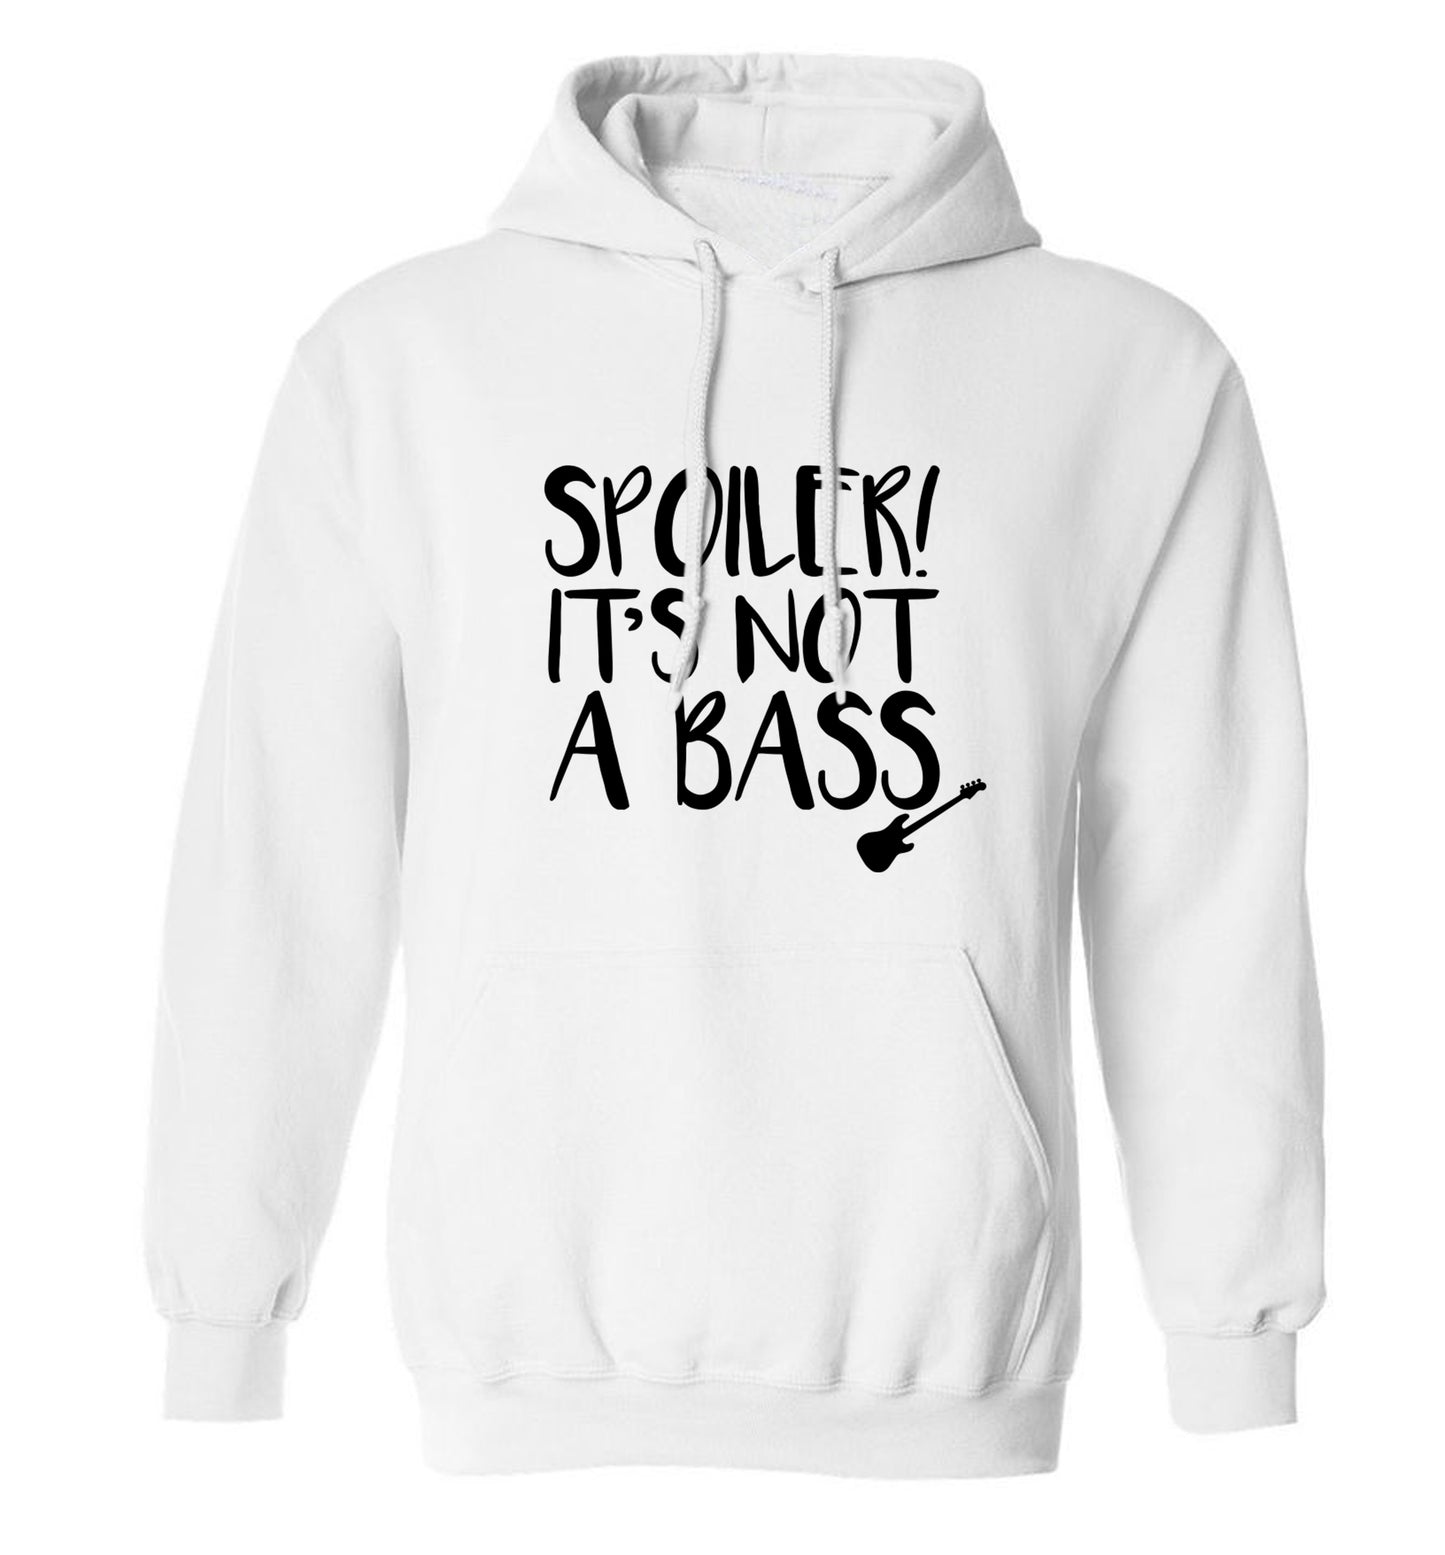 Spoiler it's not a bass adults unisex white hoodie 2XL